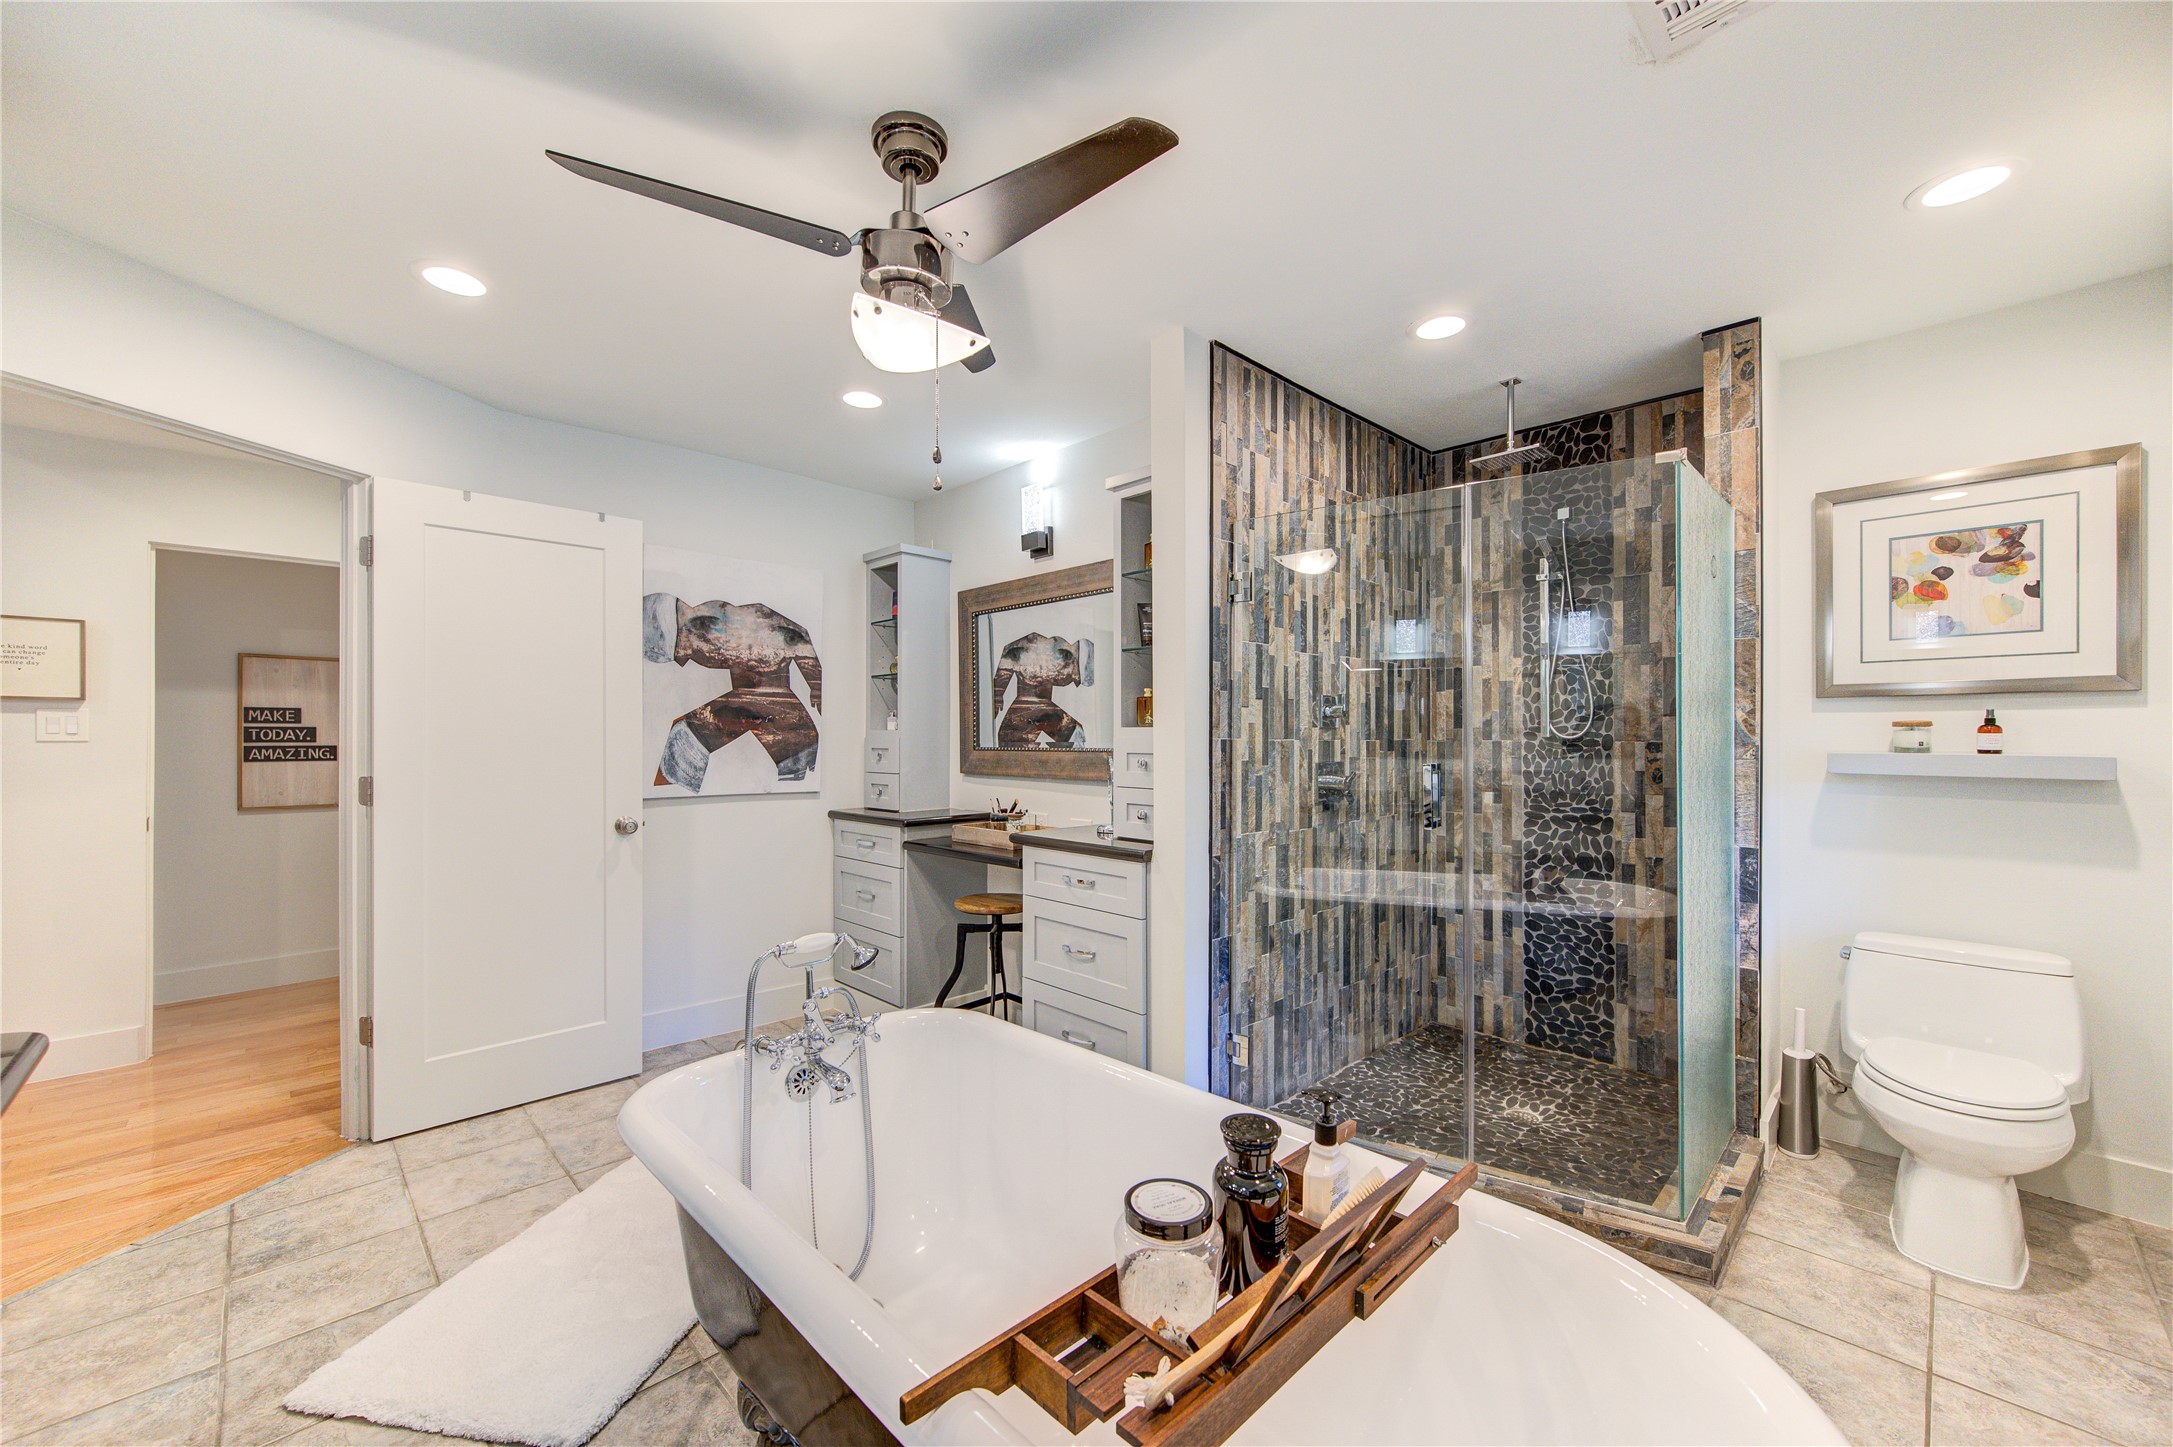 In addition to a freestanding tub, there is a walk-in shower with a rain shower and frameless glass.